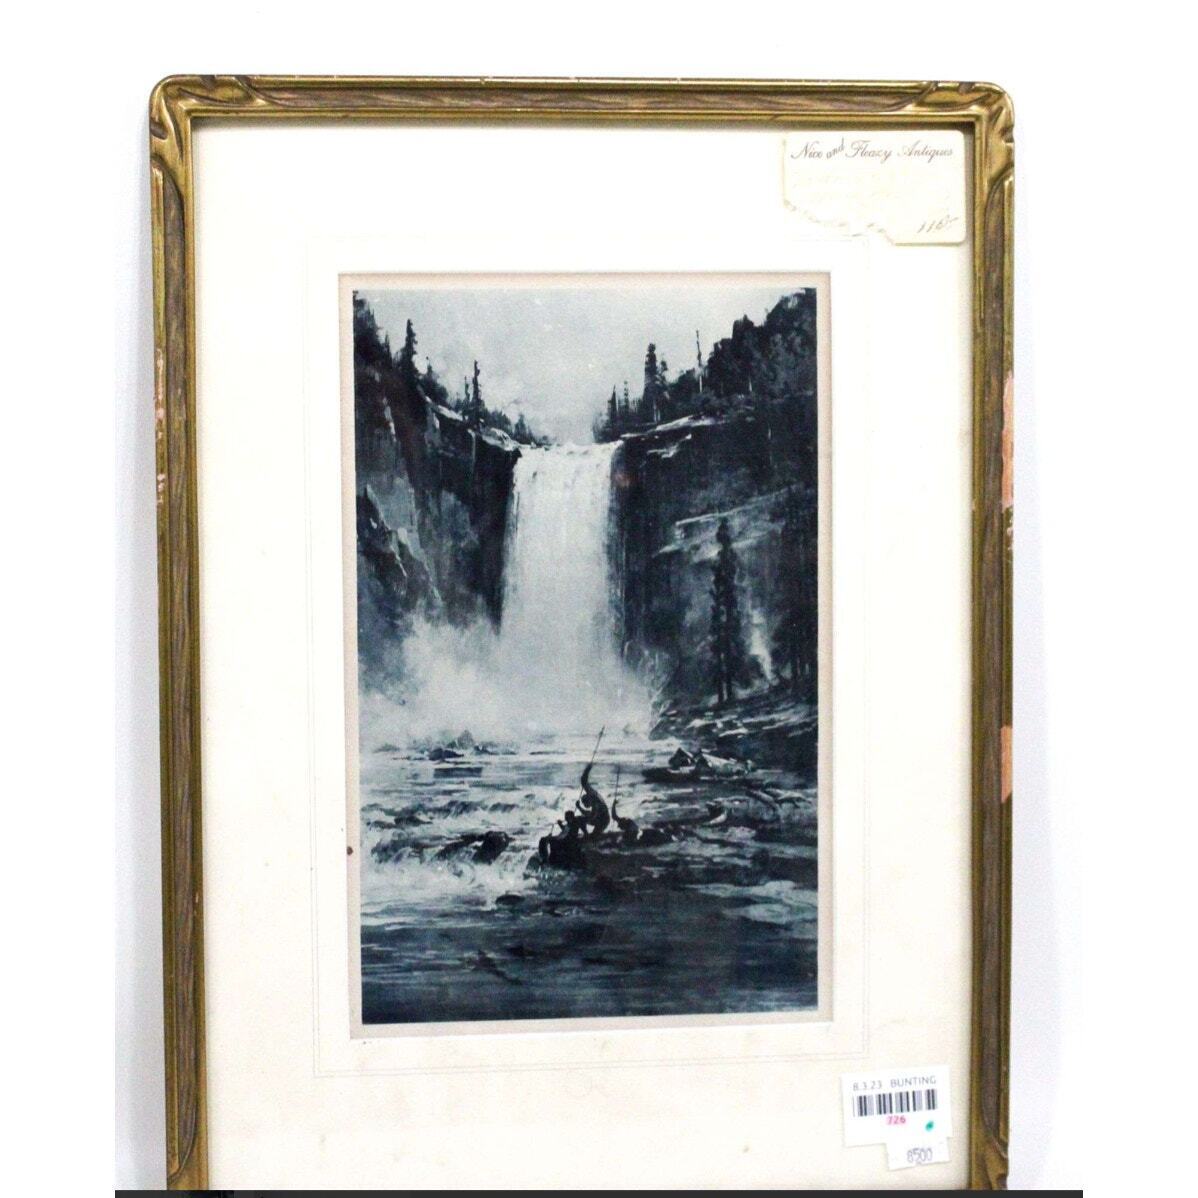 Spearing Salmon at McCloud River Falls Photogravure Thomas Hill Framed 